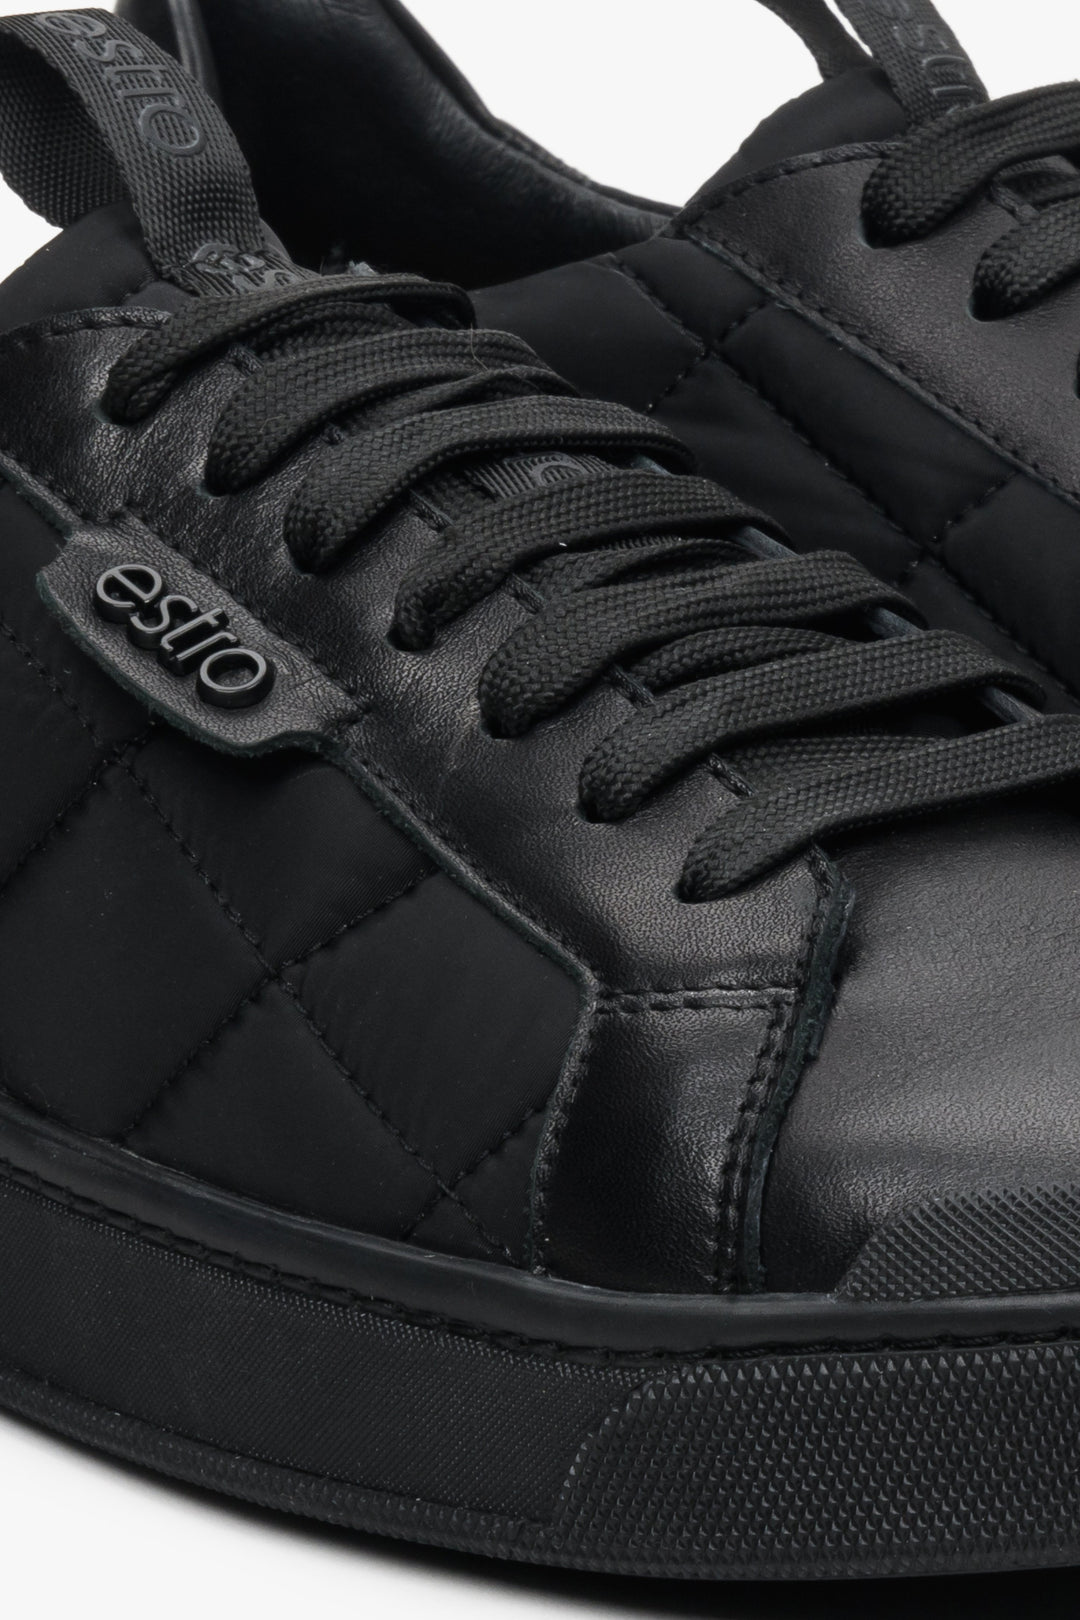 Men's black Estro sneakers for spring and autumn - a close-up of the details.